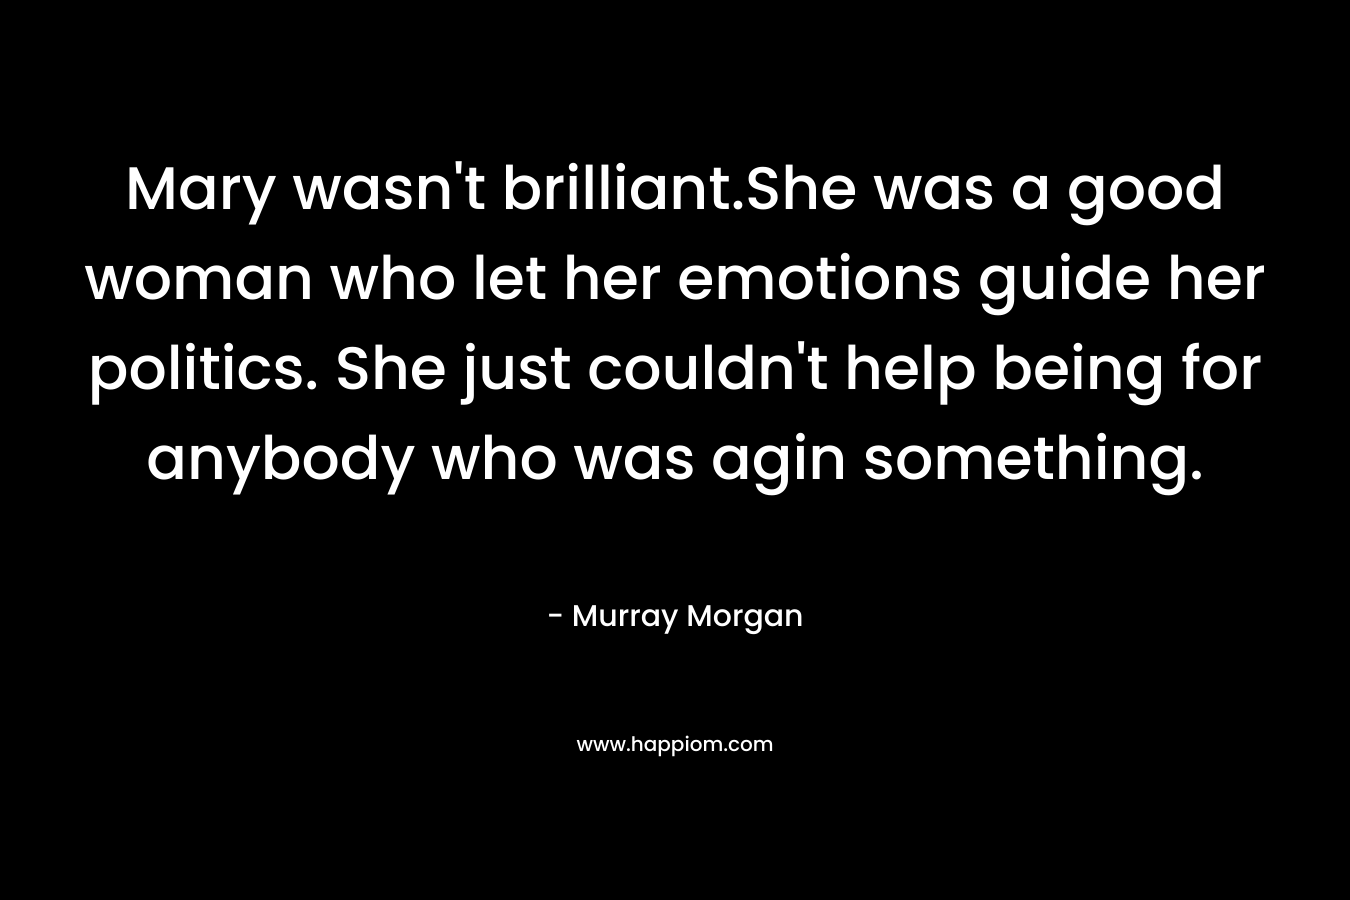 Mary wasn’t brilliant.She was a good woman who let her emotions guide her politics. She just couldn’t help being for anybody who was agin something. – Murray Morgan